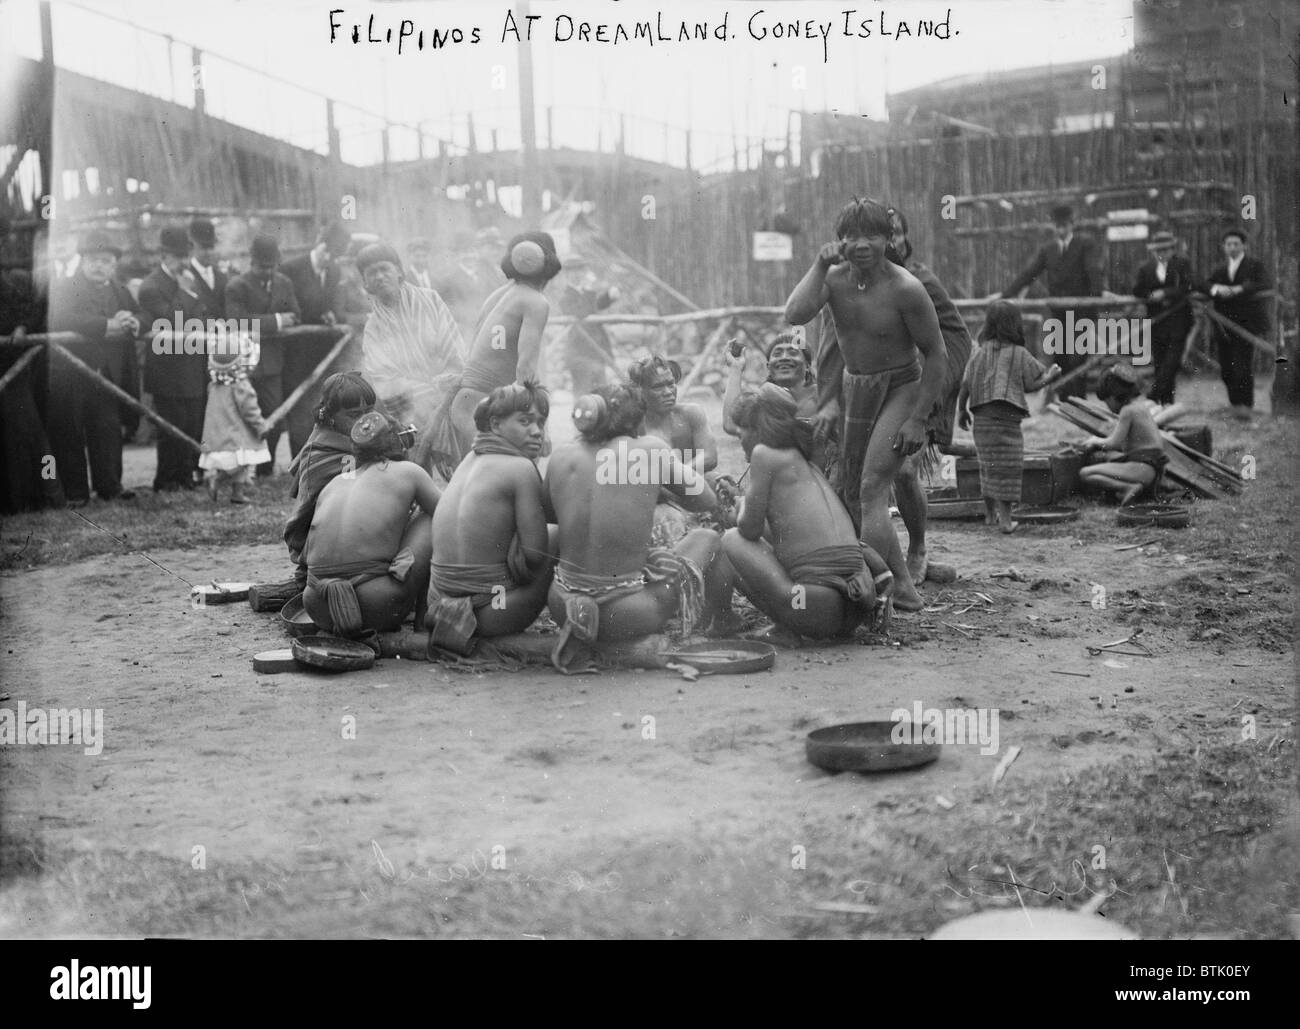 Coney Island, Filipinos in loin cloths sitting in circle together at Dreamland, New York, photograph, May 27, 1907. Stock Photo